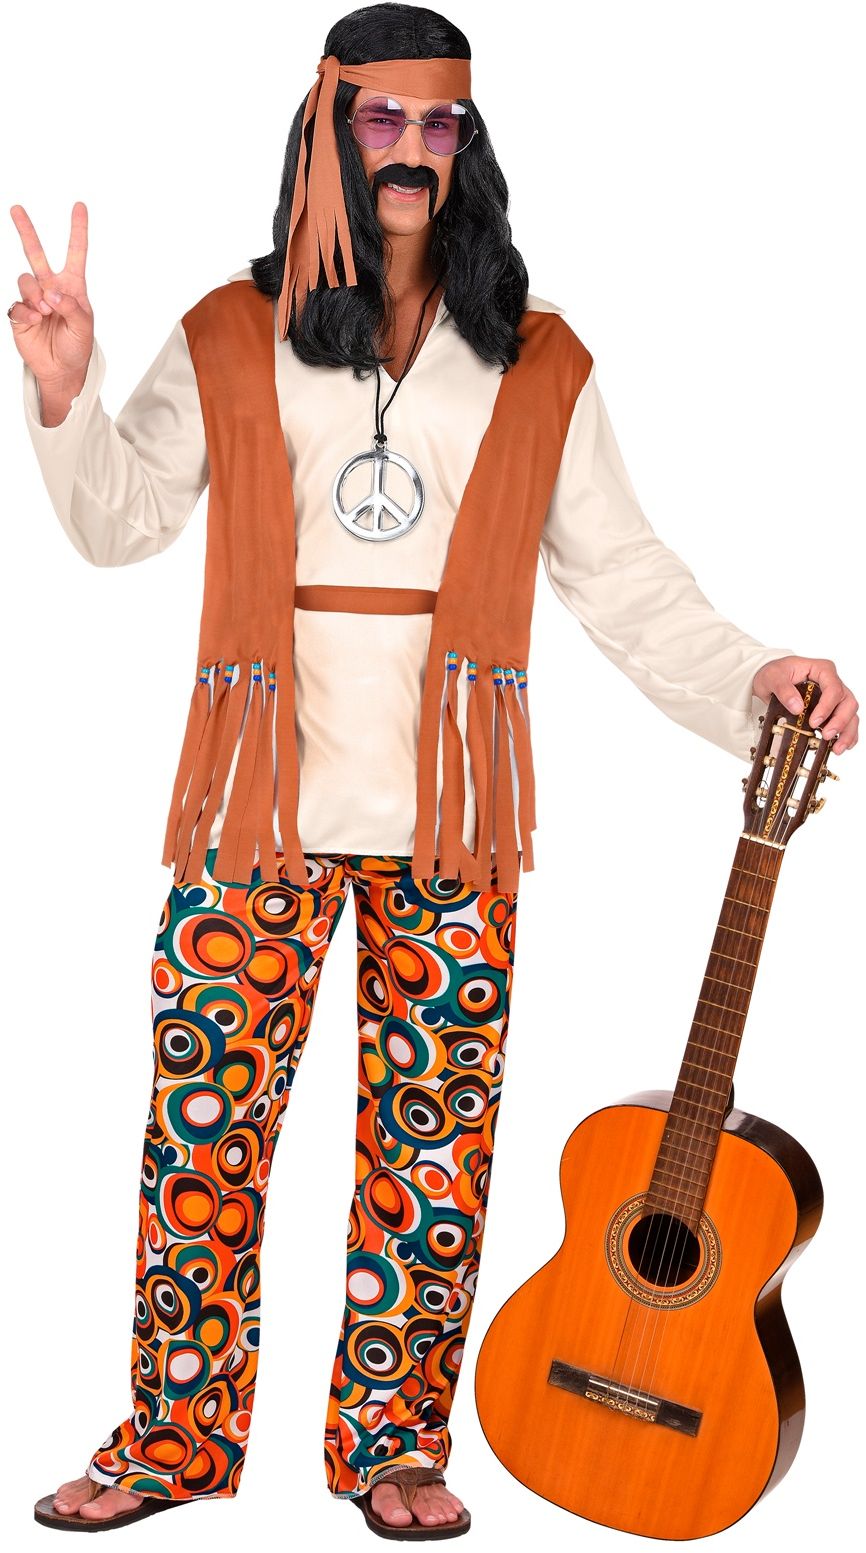 Hippie carnaval outfit